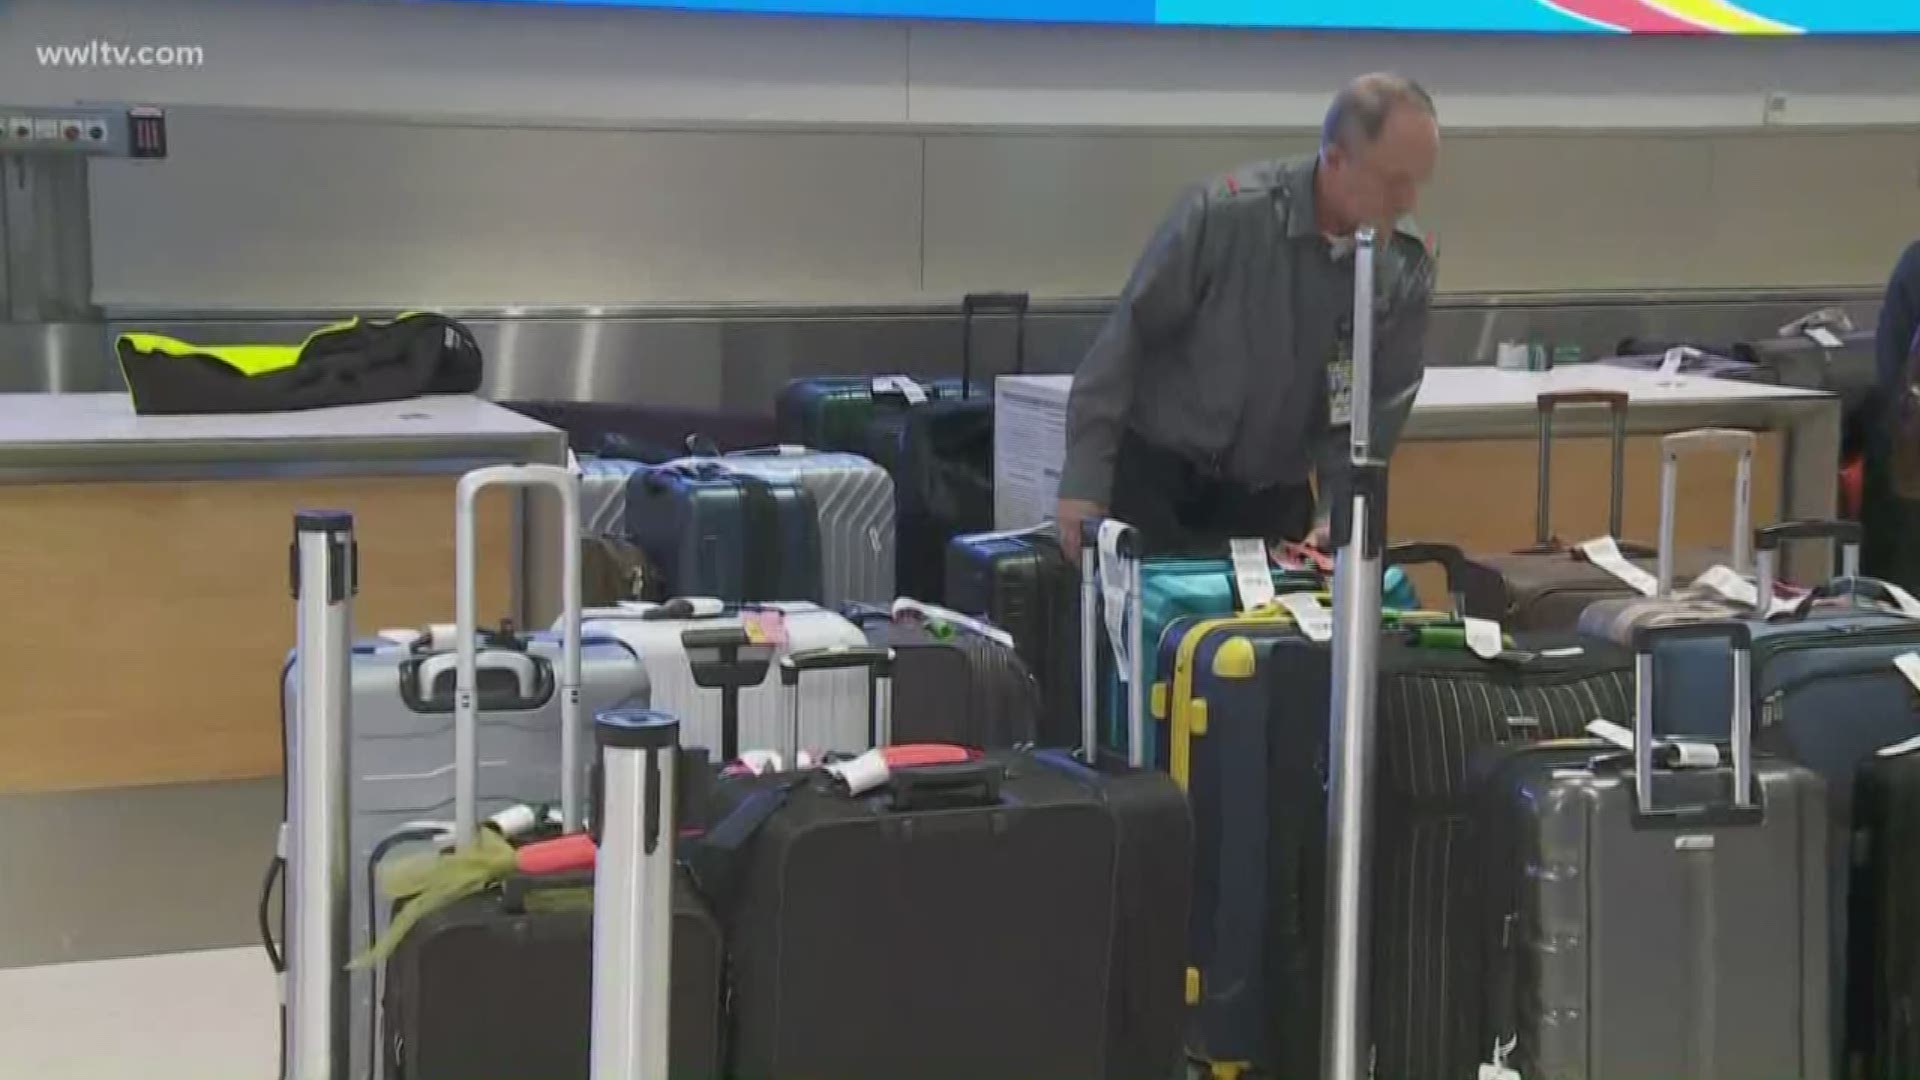 The airport has been experiencing problems while taking checked bags, a spokesperson with the airport said.